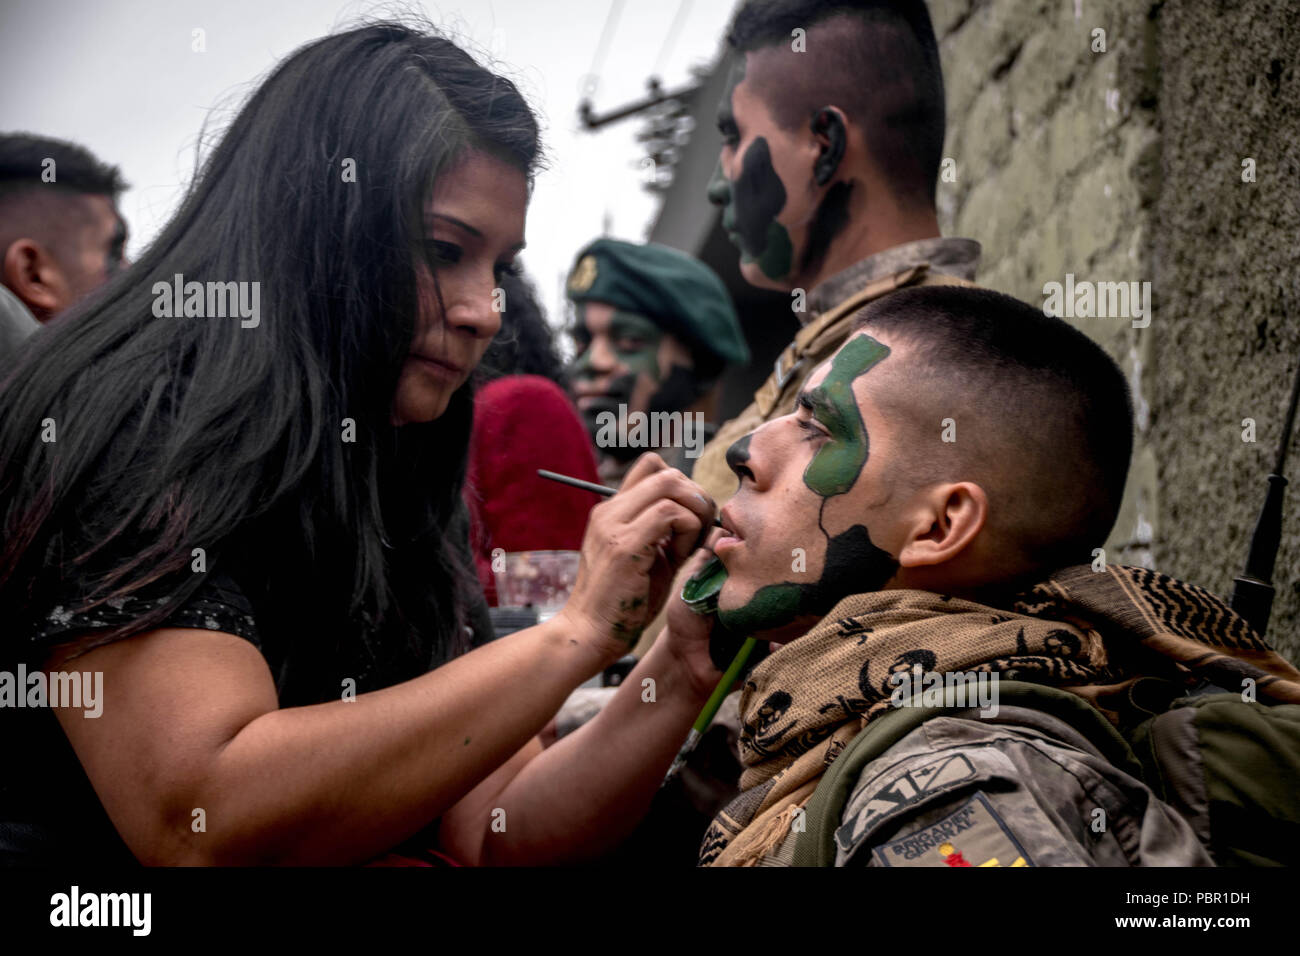 Lima, Lima Region, Peru. 29th July, 2018. A woman seen painting a camouflage on a Peruvian soldier's face.Members of Peru's armed forces, coastguard, search & rescue, and police march in full uniform during the country's Gran Parada Militar. This parade always occurs the day after Peru's Independence Day marking the official end of festivities across the nation. Credit: Jason Sheil/SOPA Images/ZUMA Wire/Alamy Live News Stock Photo